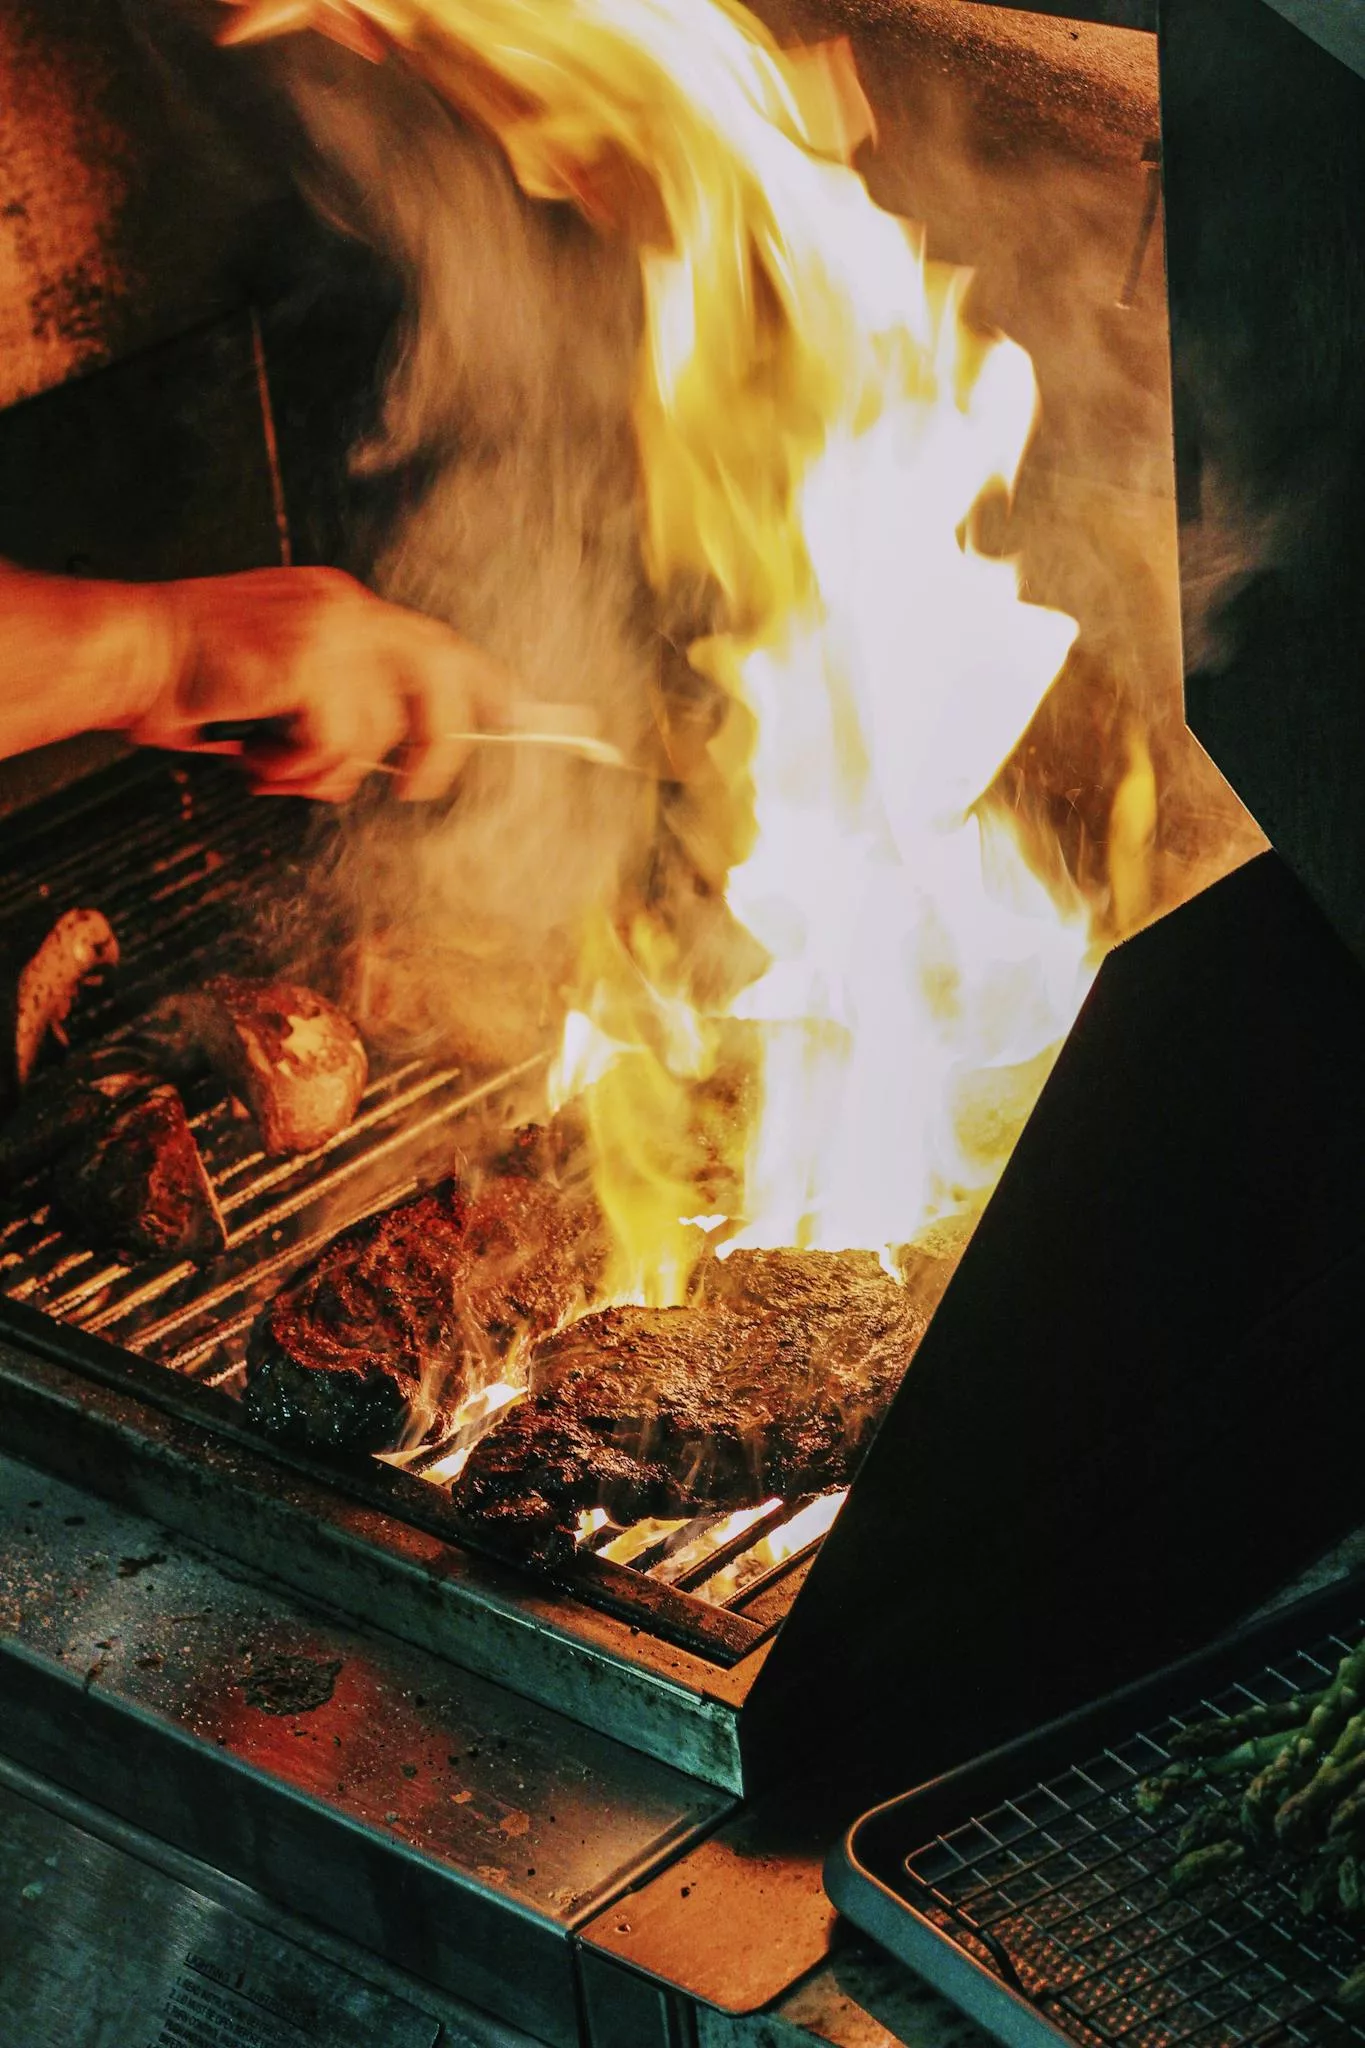 Flames on a Barbecue